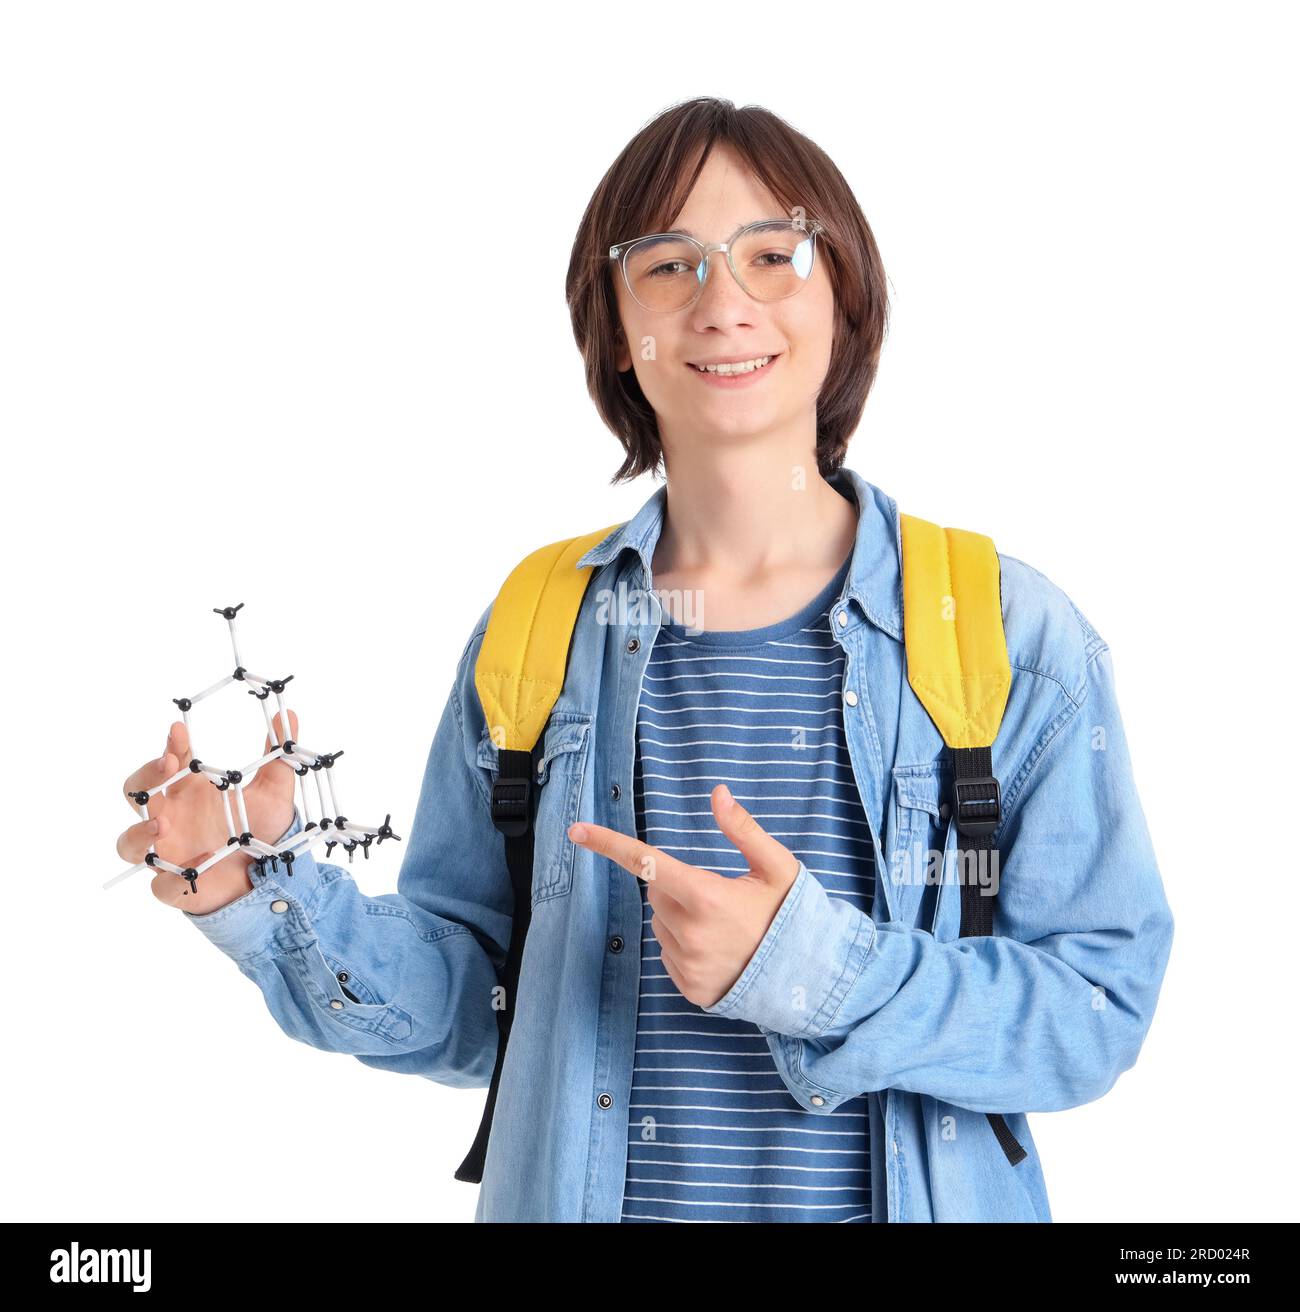 Male student pointing at molecular model on white background Stock Photo